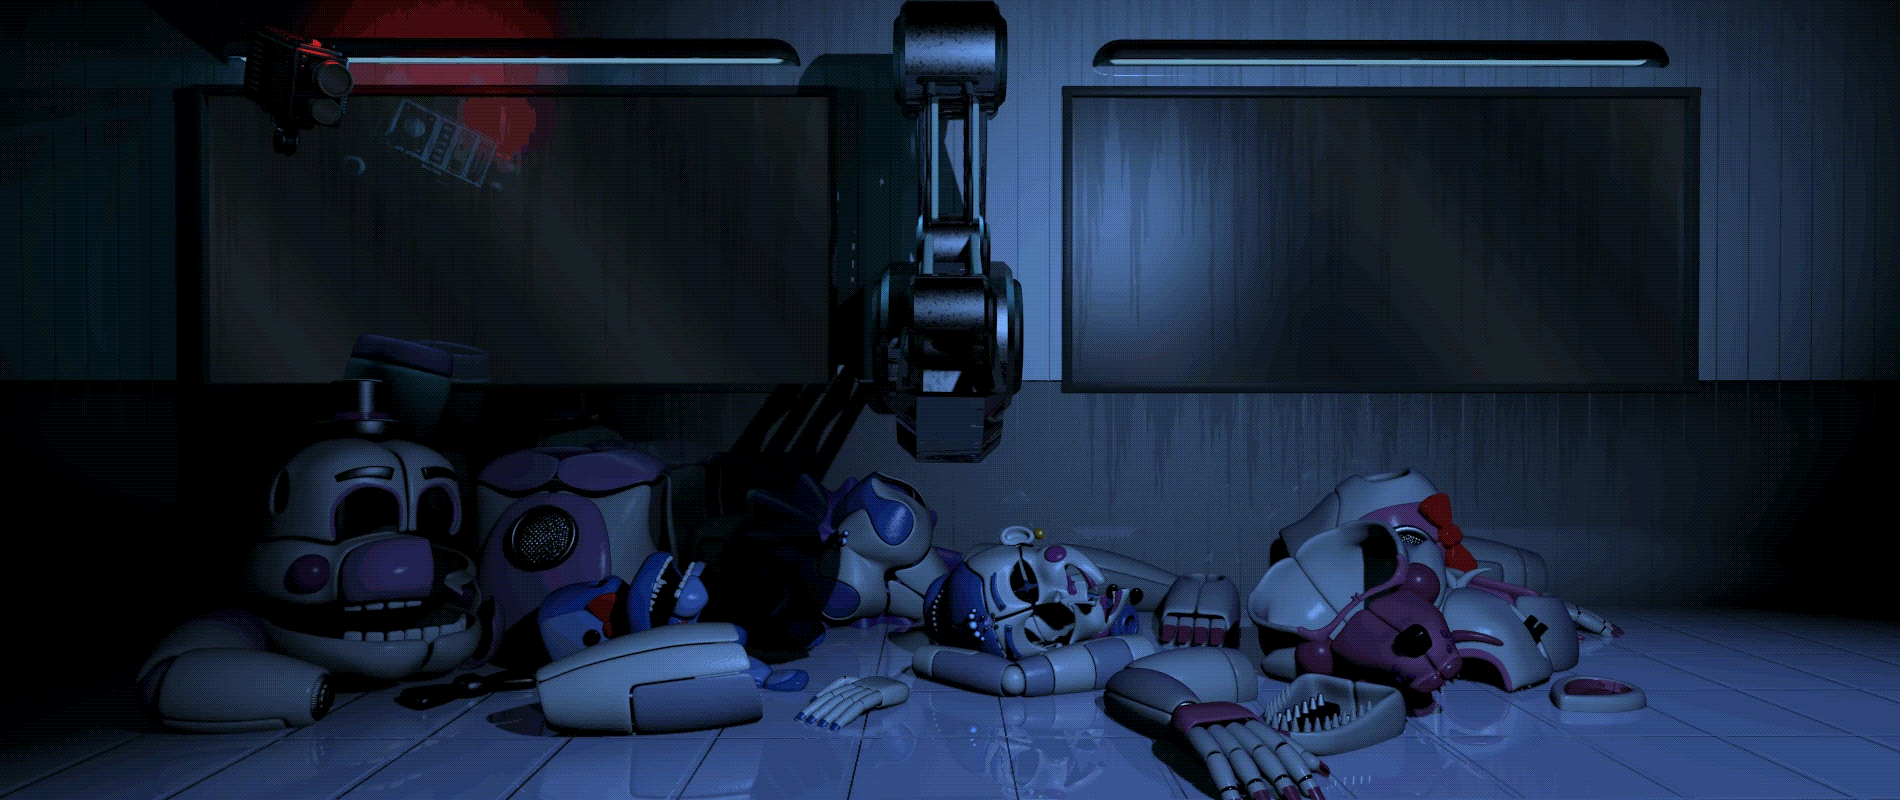 image scooping room scooper noche 5 sister location gif five